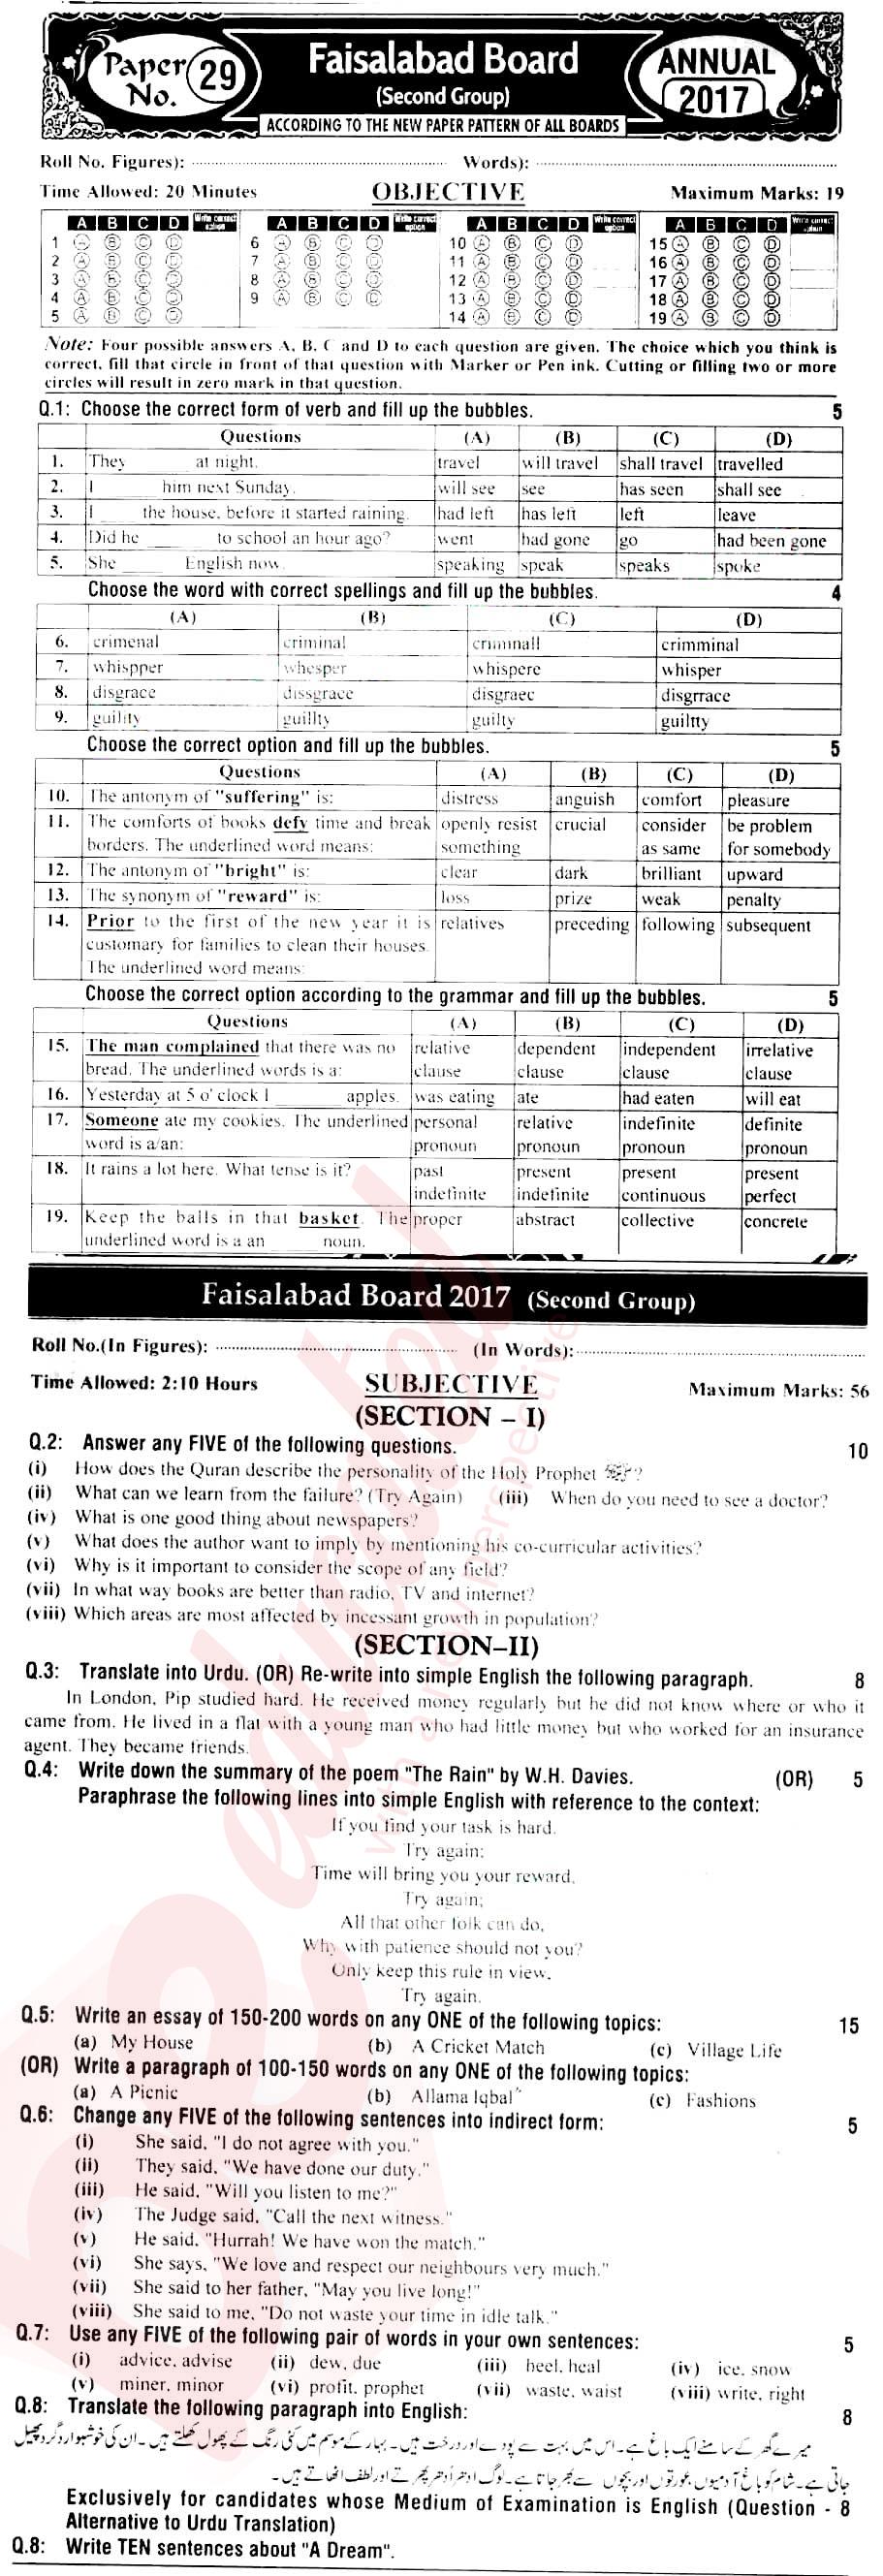 English 10th class Past Paper Group 2 BISE Faisalabad 2017